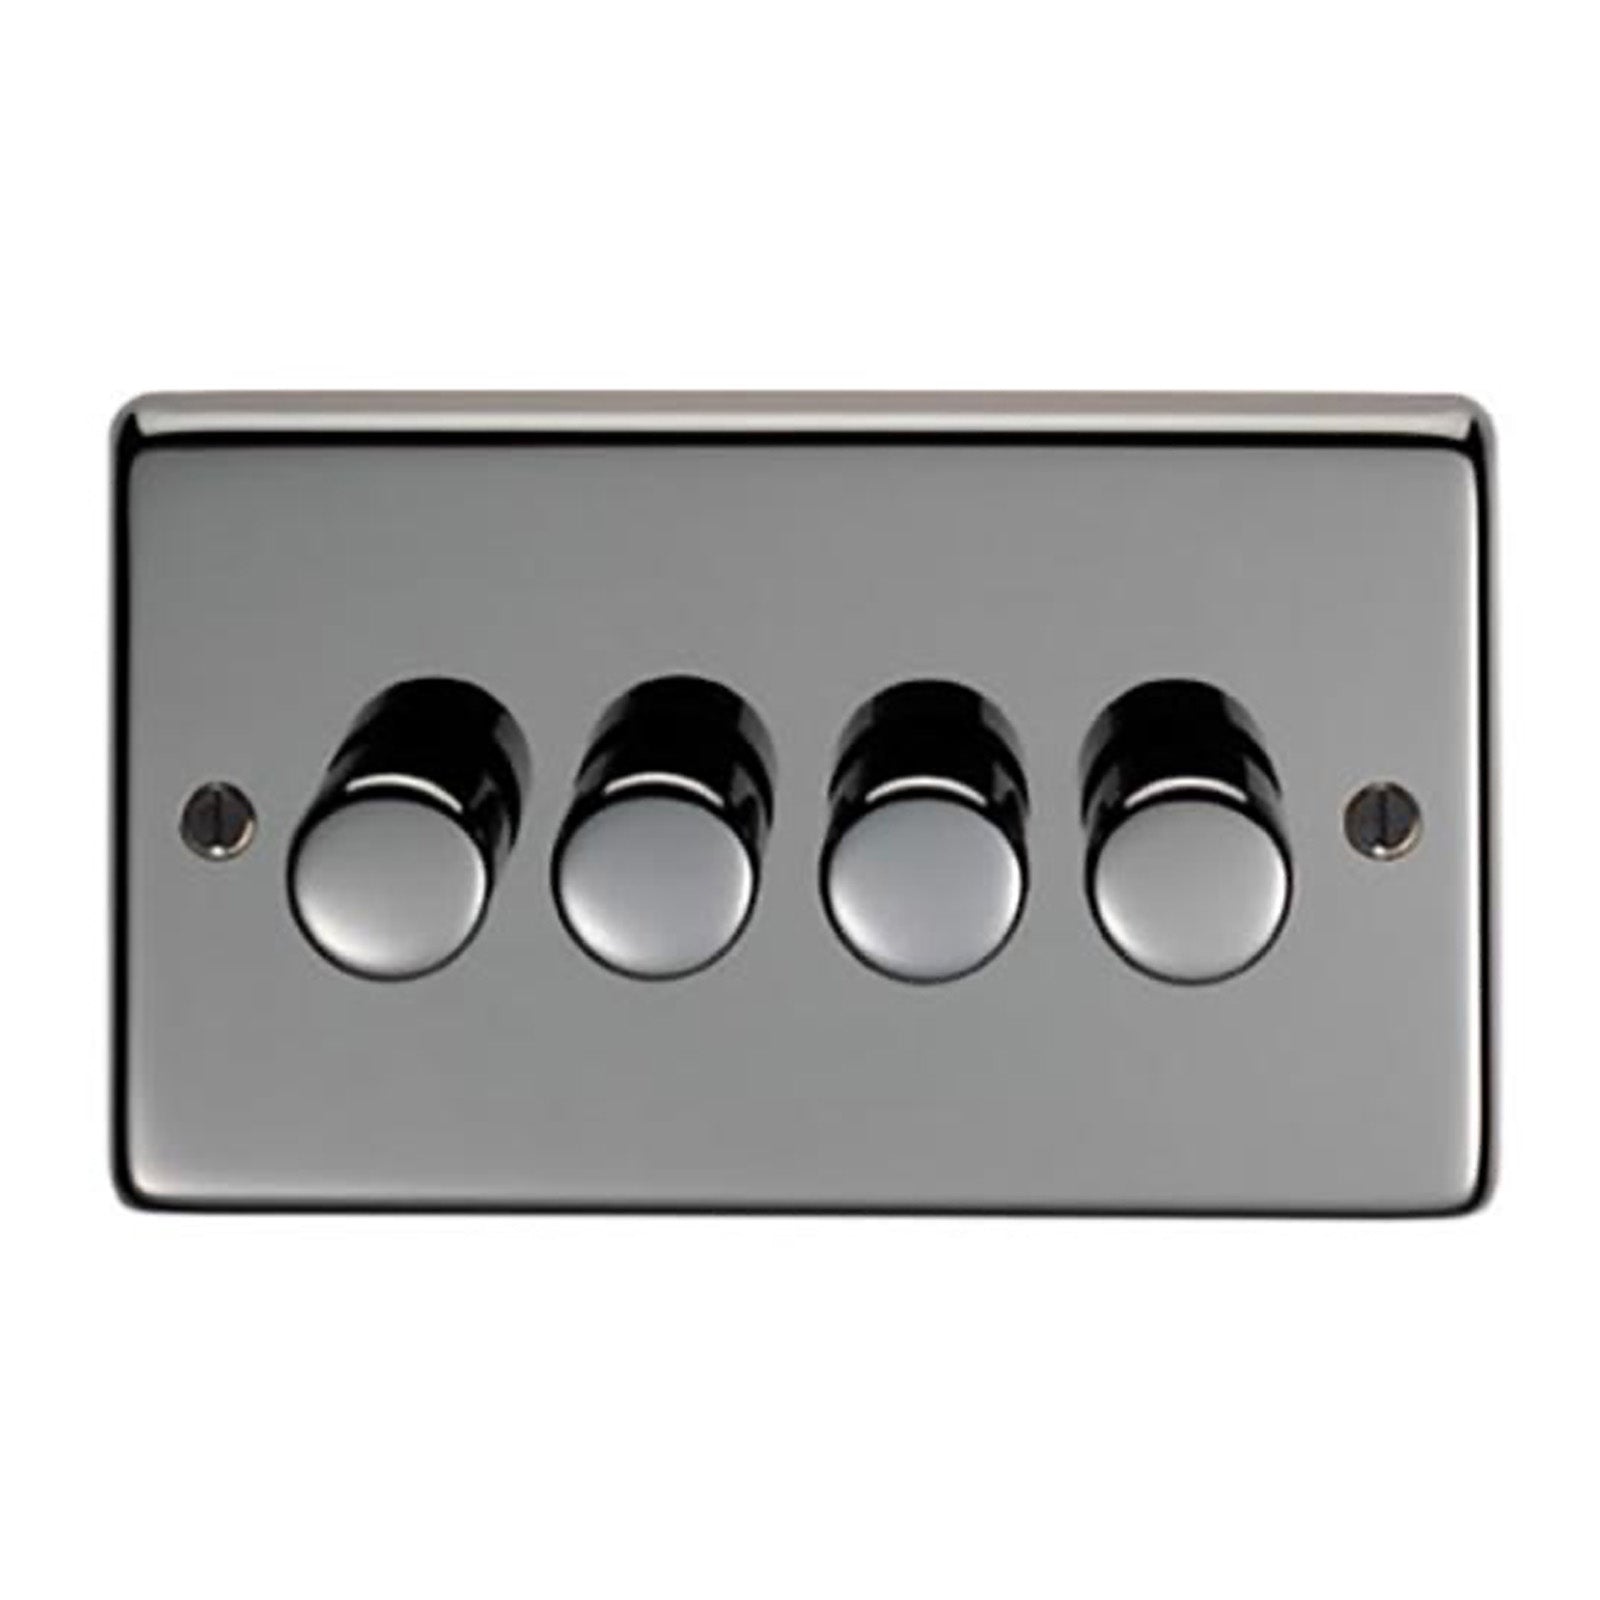 SHOW Image of Quad LED Dimmer Switch with Black Nickel finish